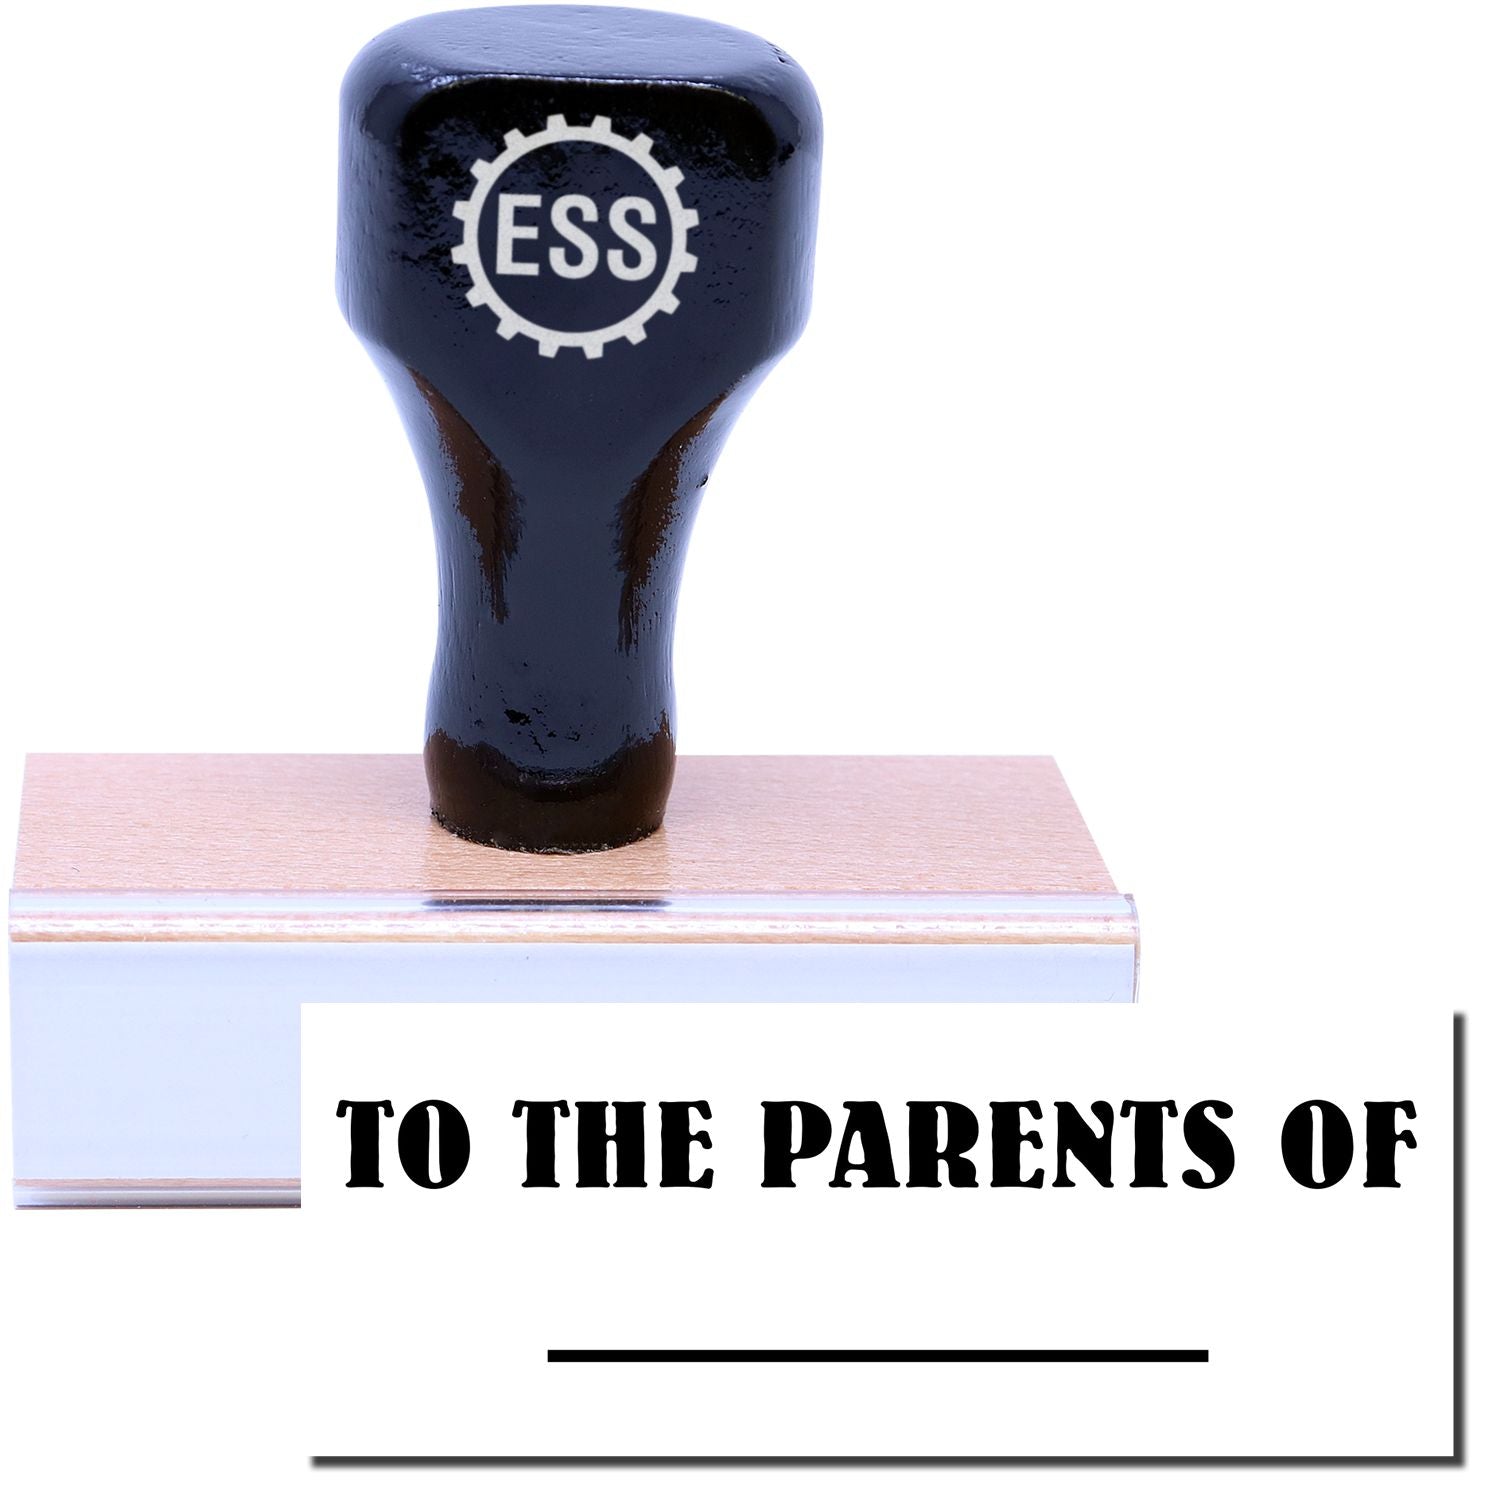 A stock office rubber stamp with a stamped image showing how the text "TO THE PARENTS OF" in a large font with a line underneath is displayed after stamping.